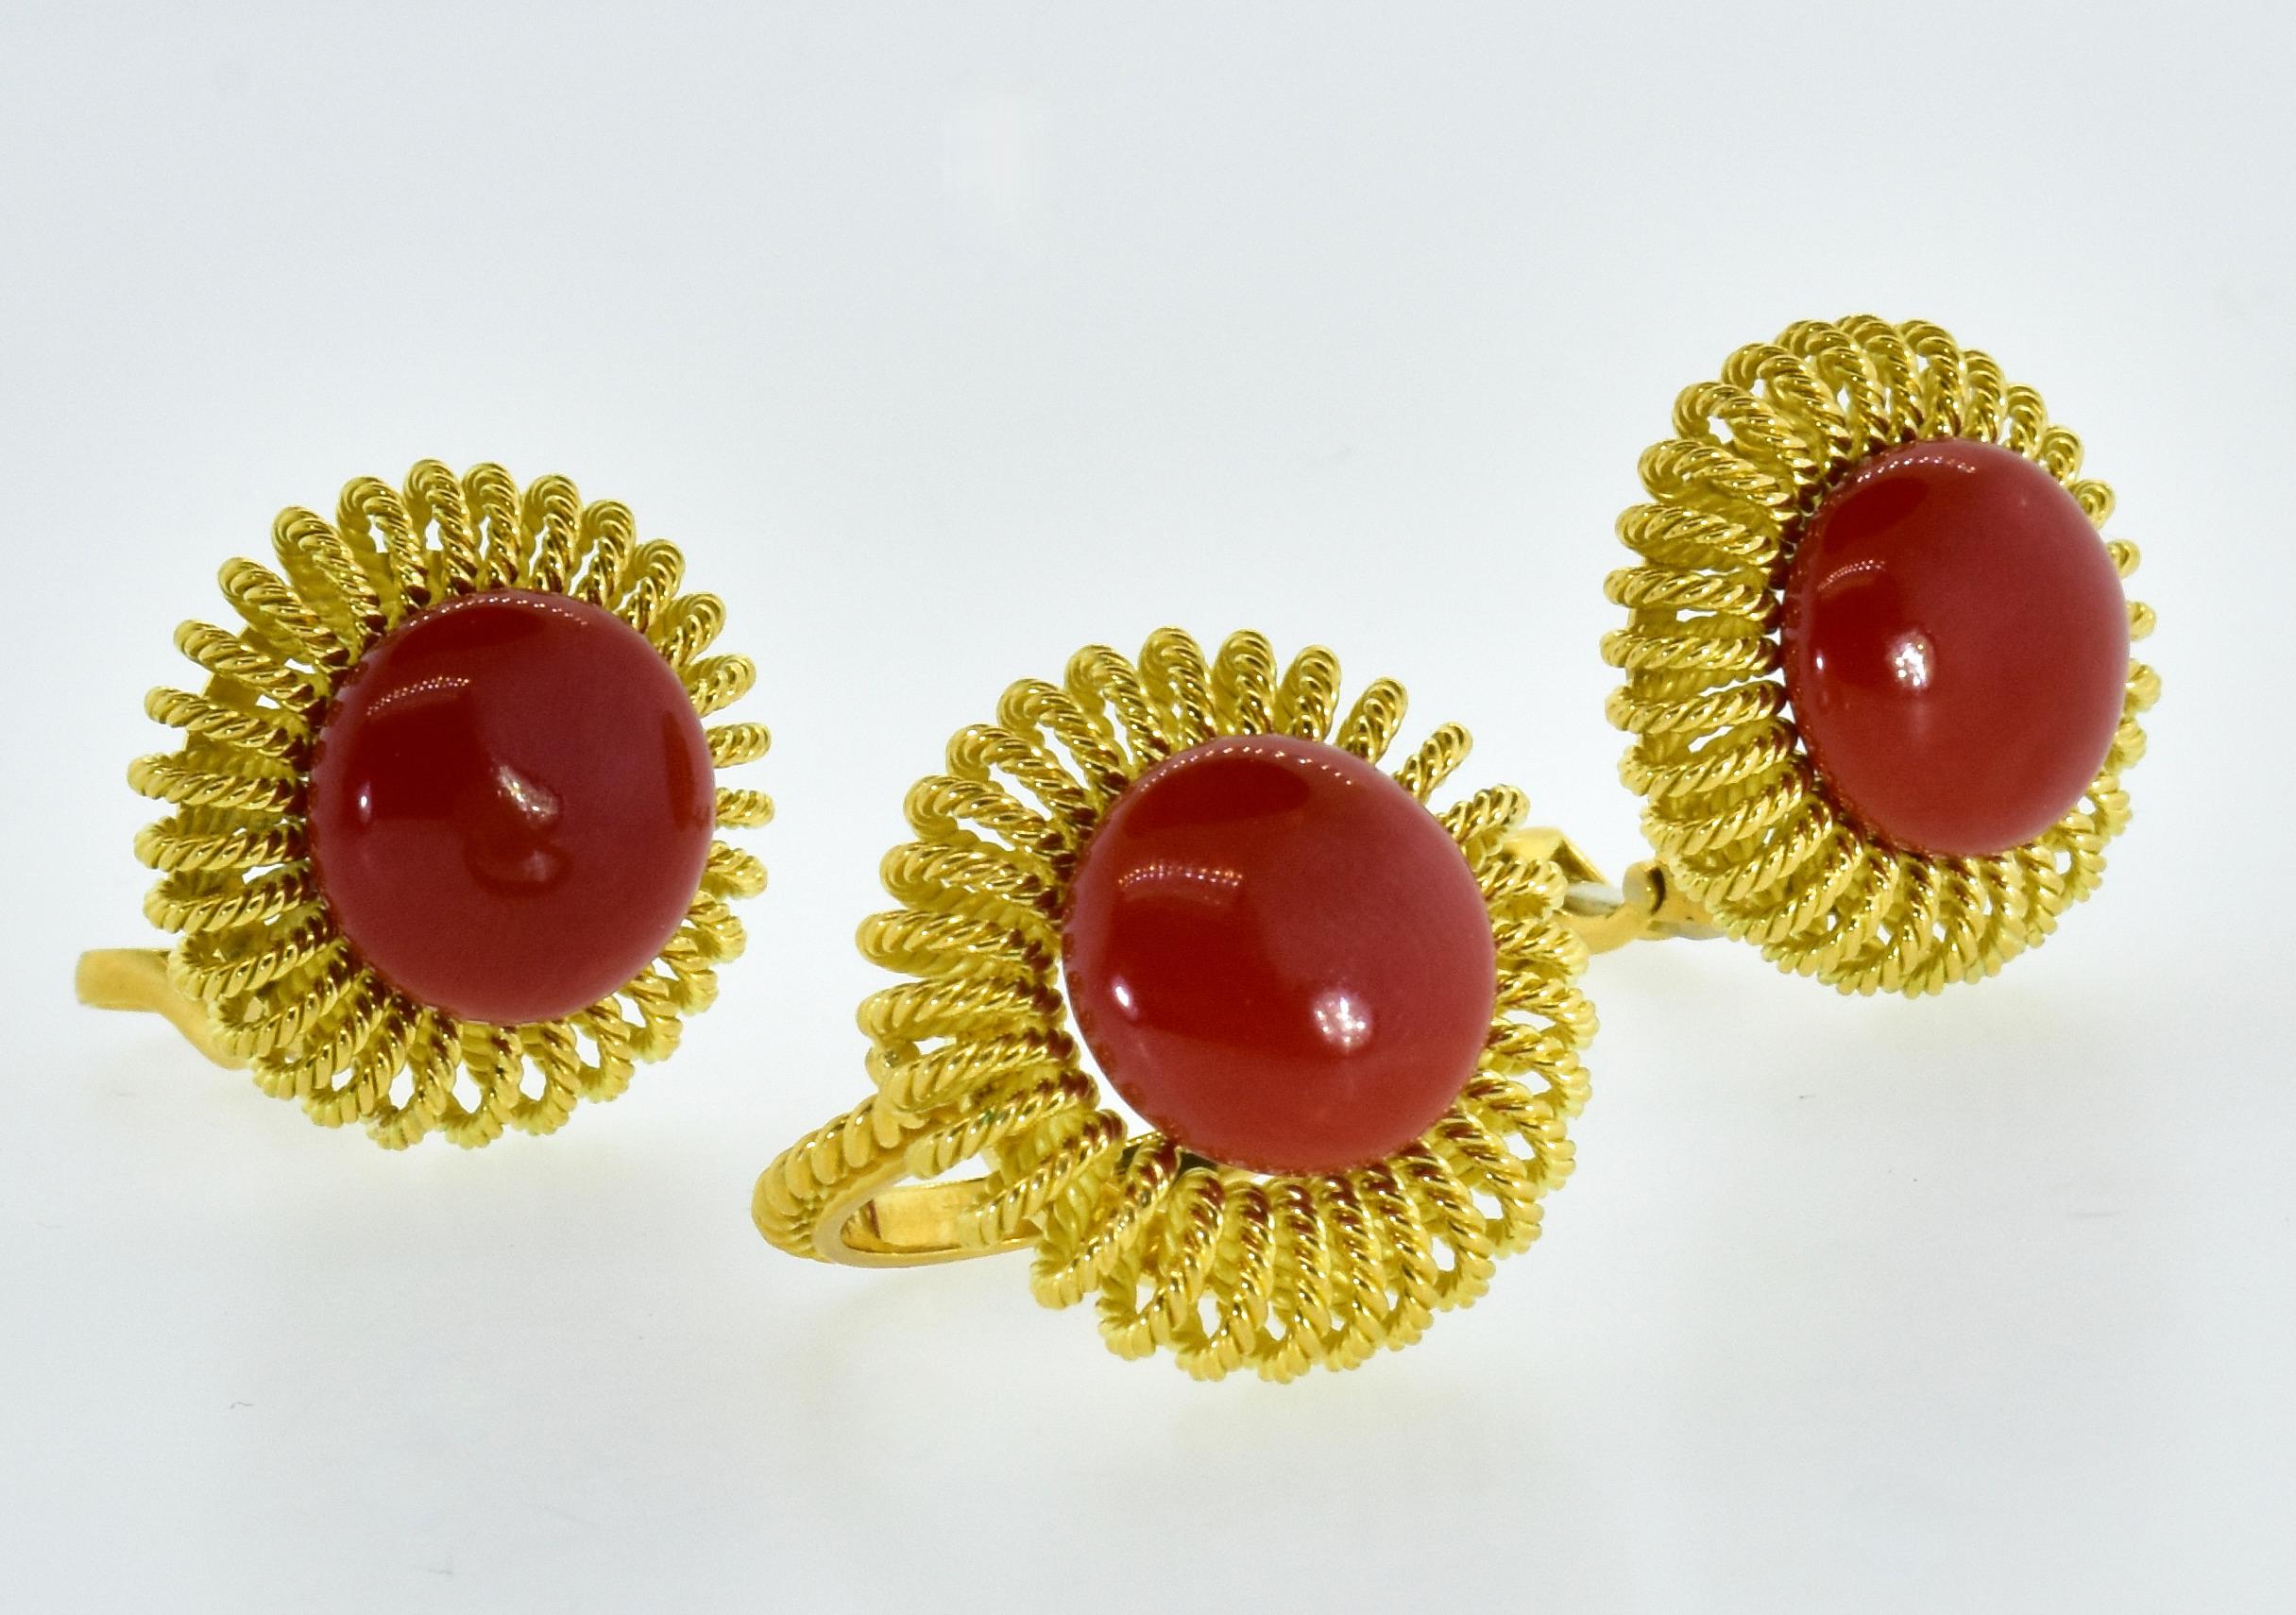 Vintage suite of fine natural oxblood red coral earrings and matching ring all in 18K.  This unusual and rare suite of oxblood coral ring and earrings is circa 1950.   The earrings:  from deep, likely Mediterranean waters comes an excellently